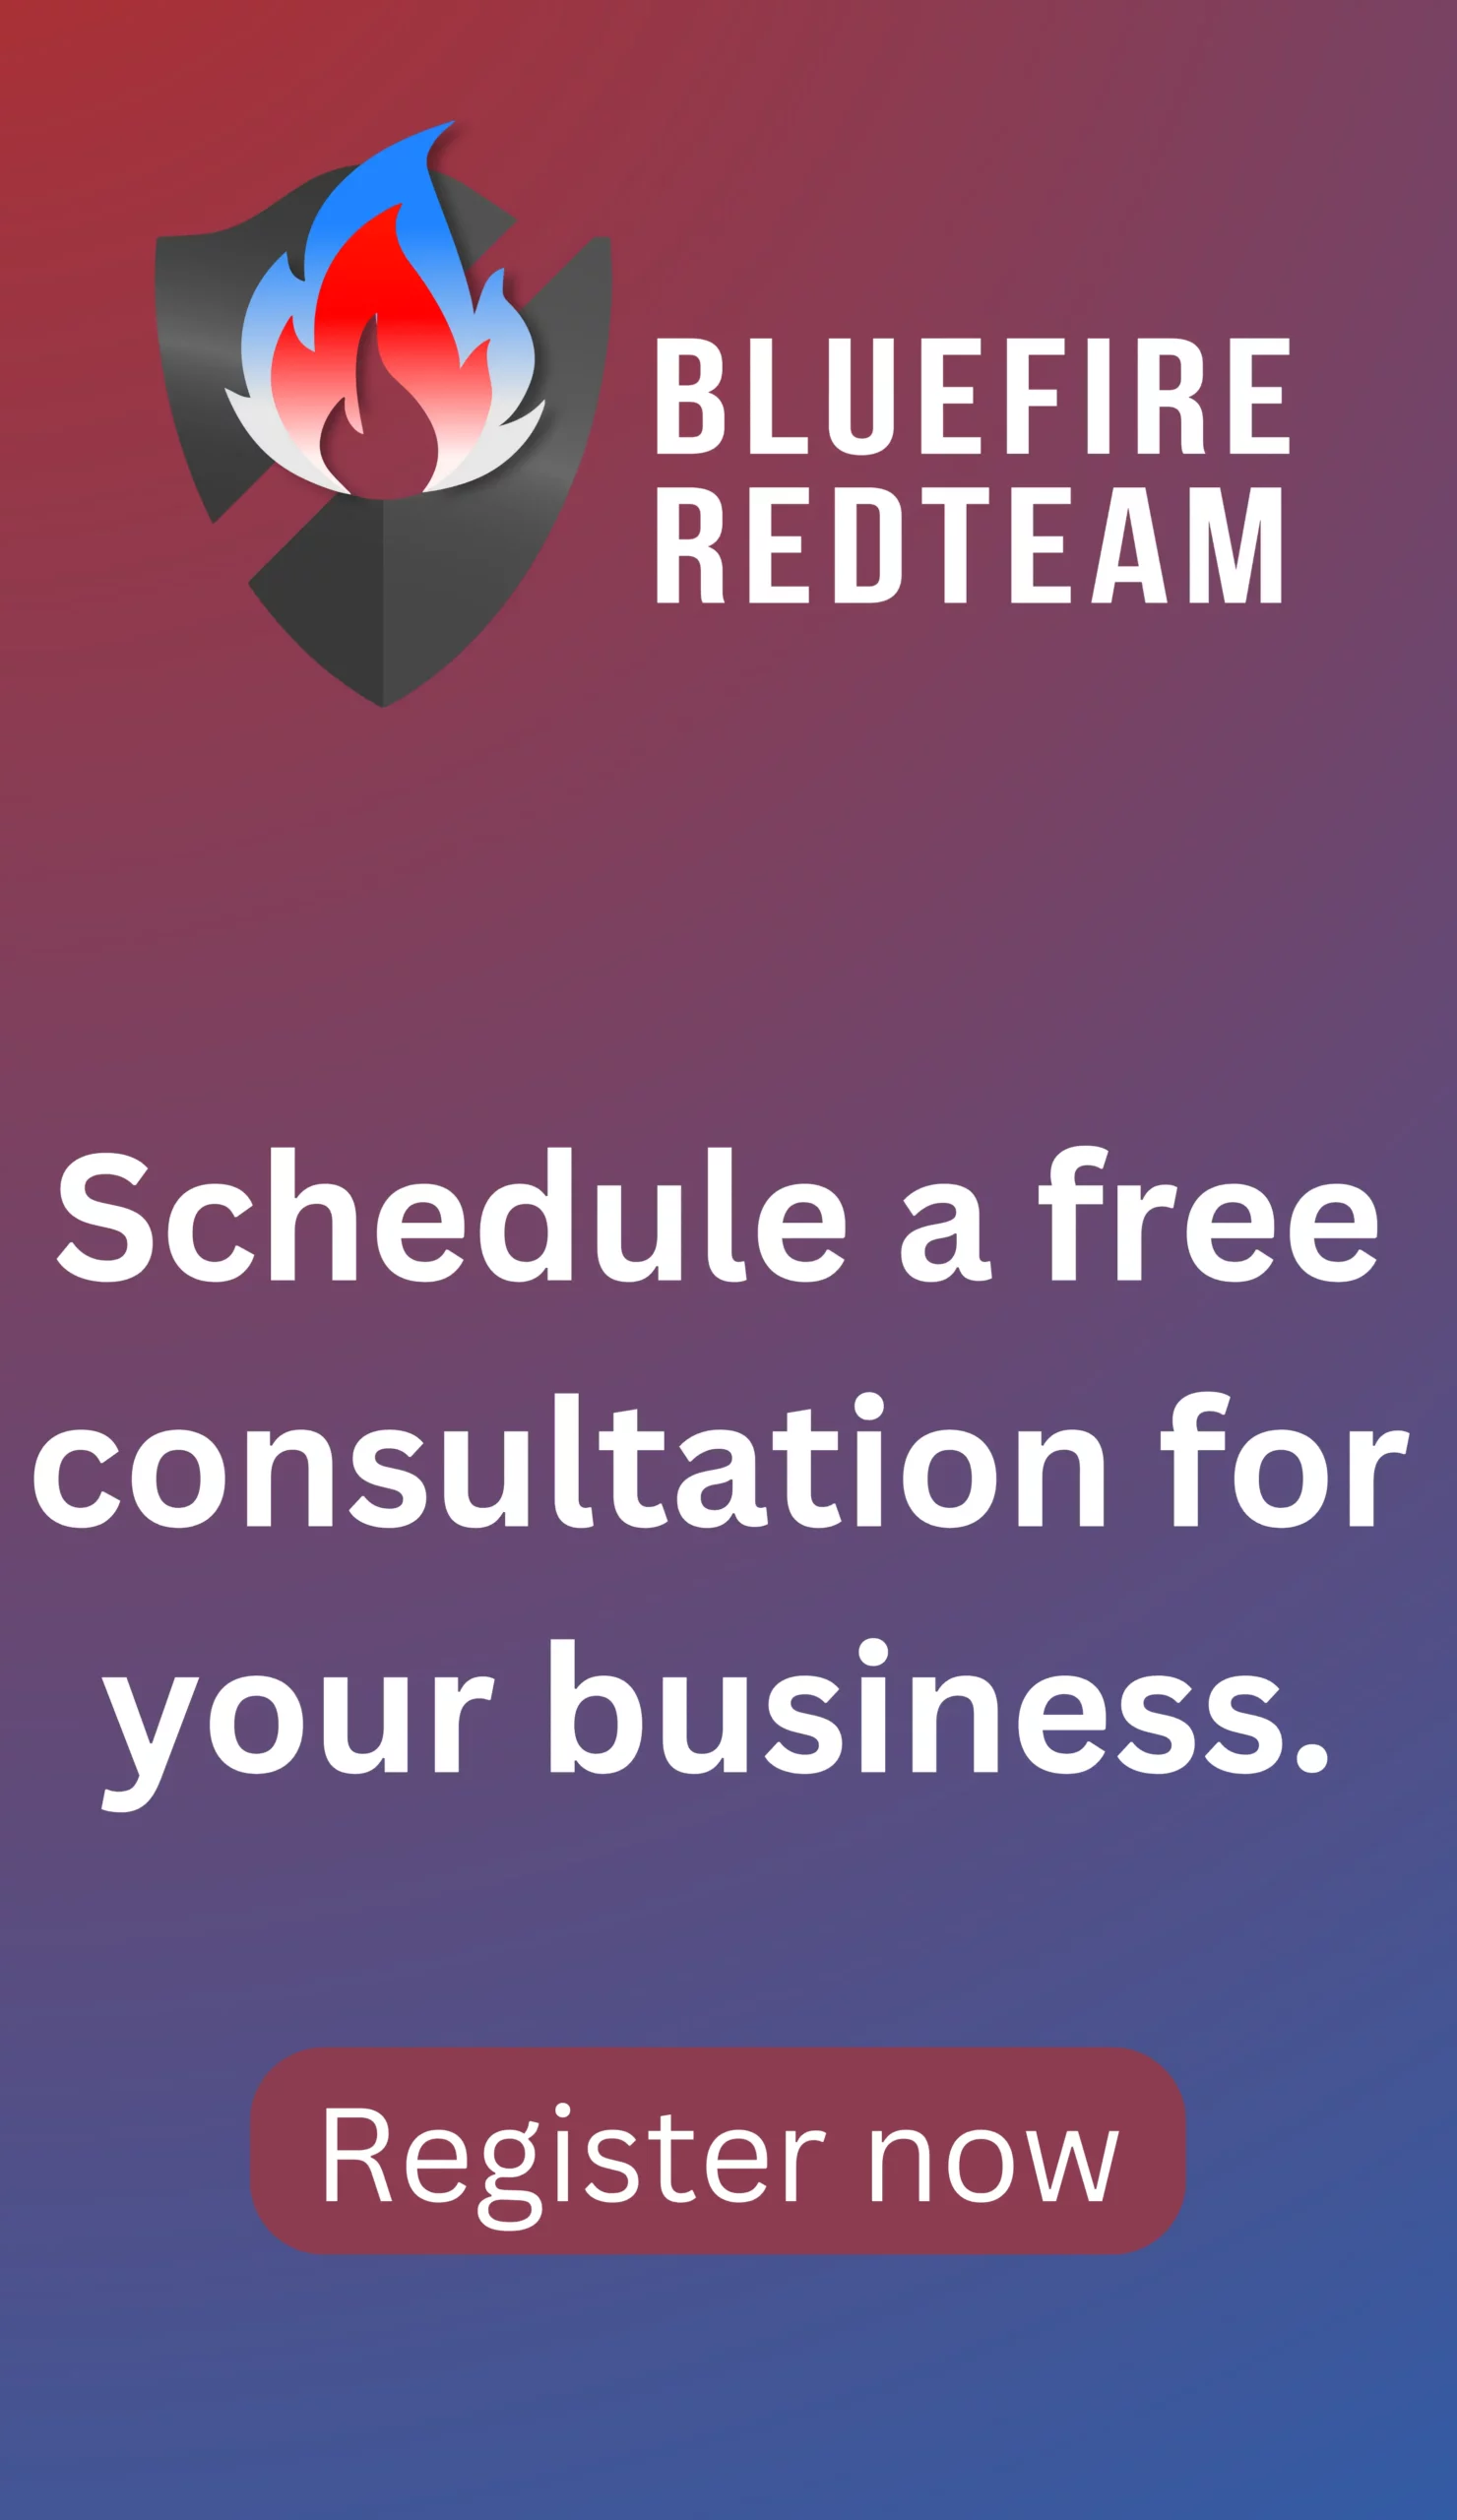 Schedule a free consultation for your business